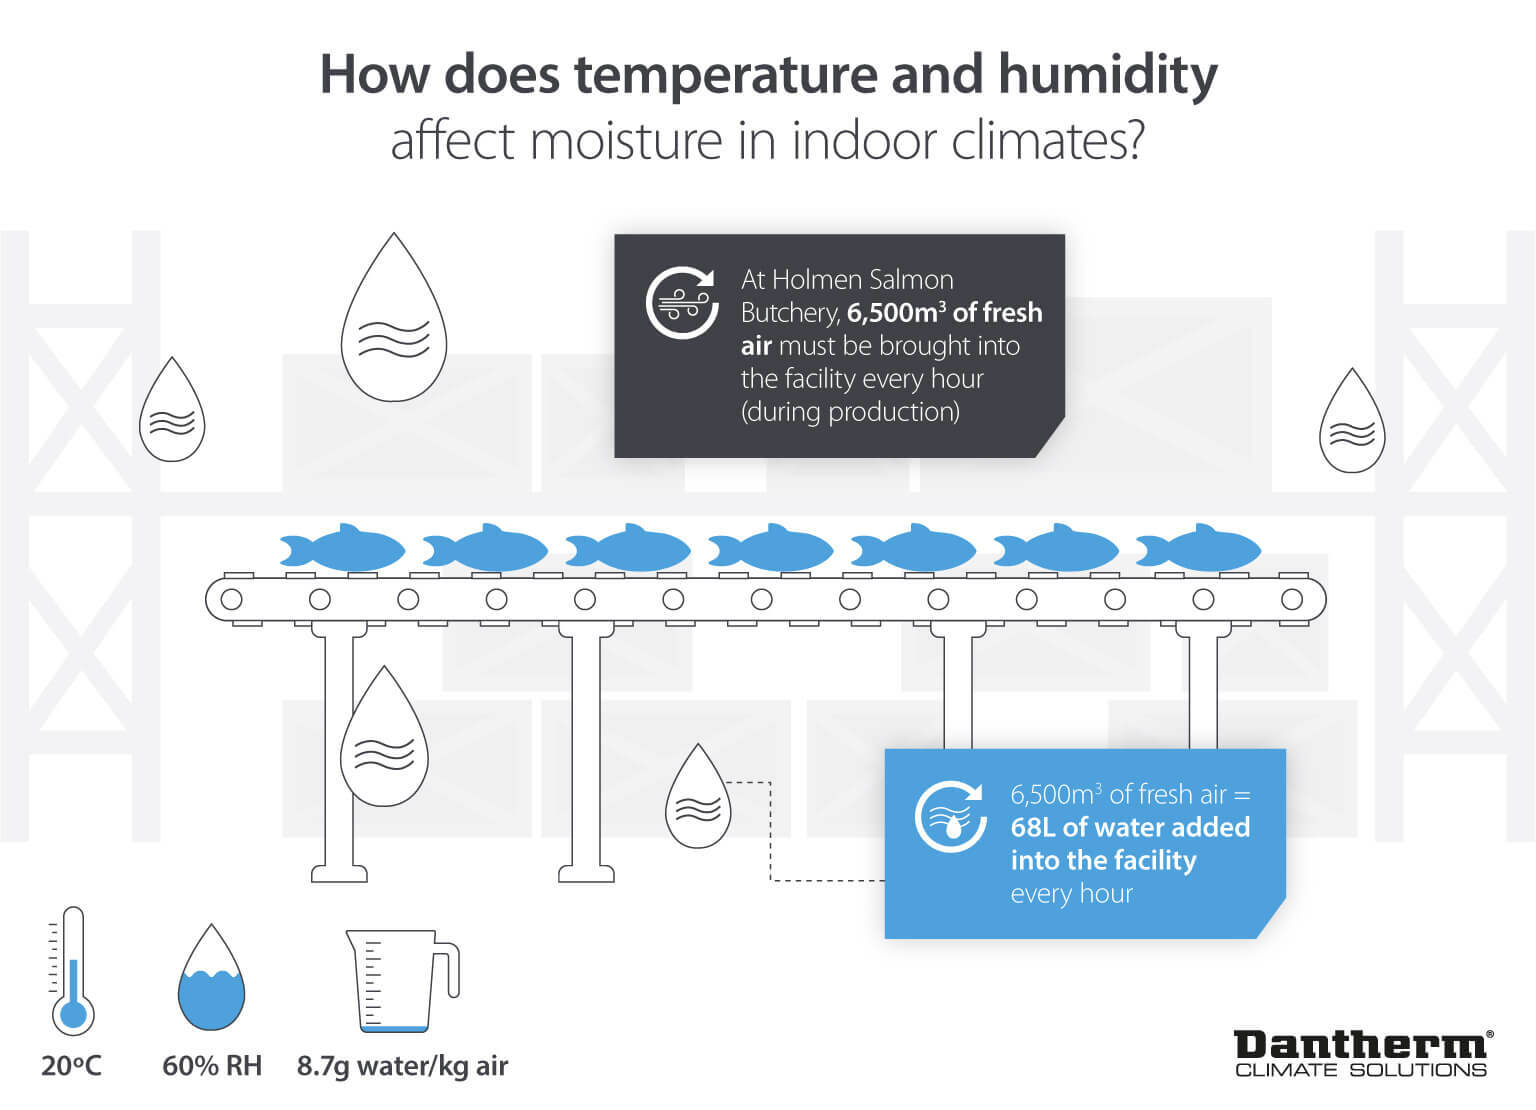 Illustration demonstrating how temperature and humidity impact on the amount of moisture in the air in indoor climates